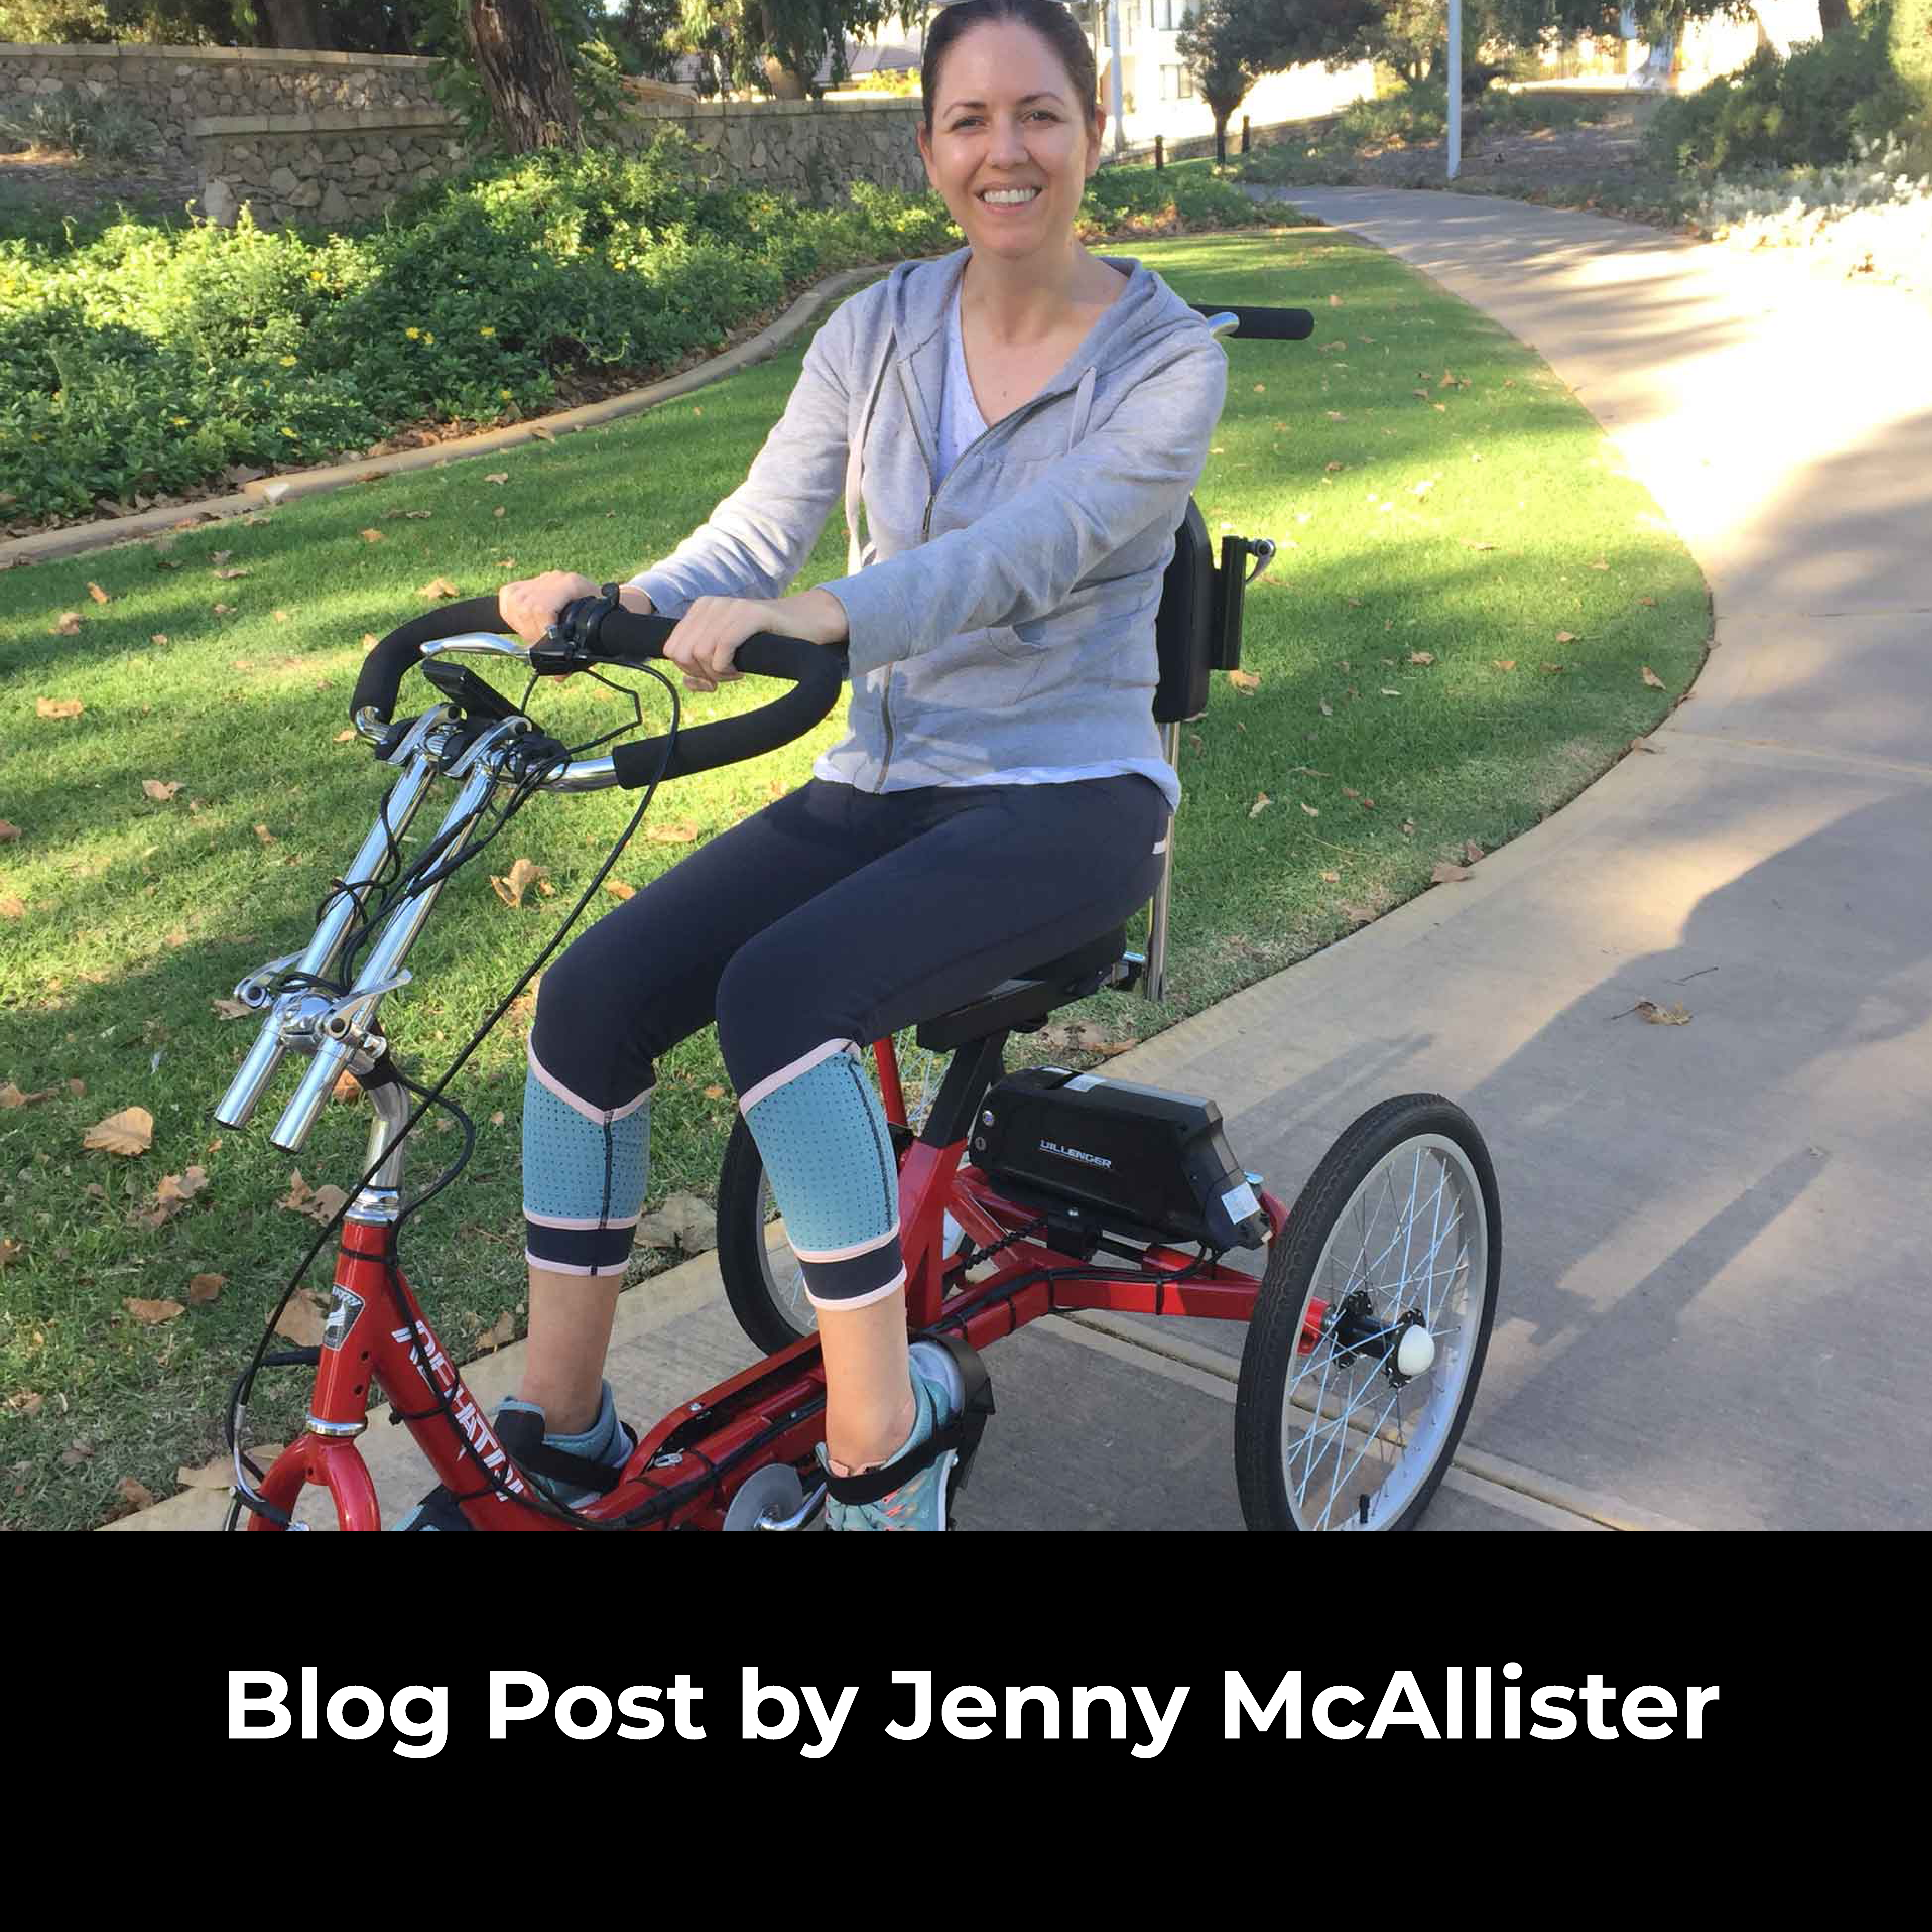 Woman is smiling while seated on her trike in a park like setting.